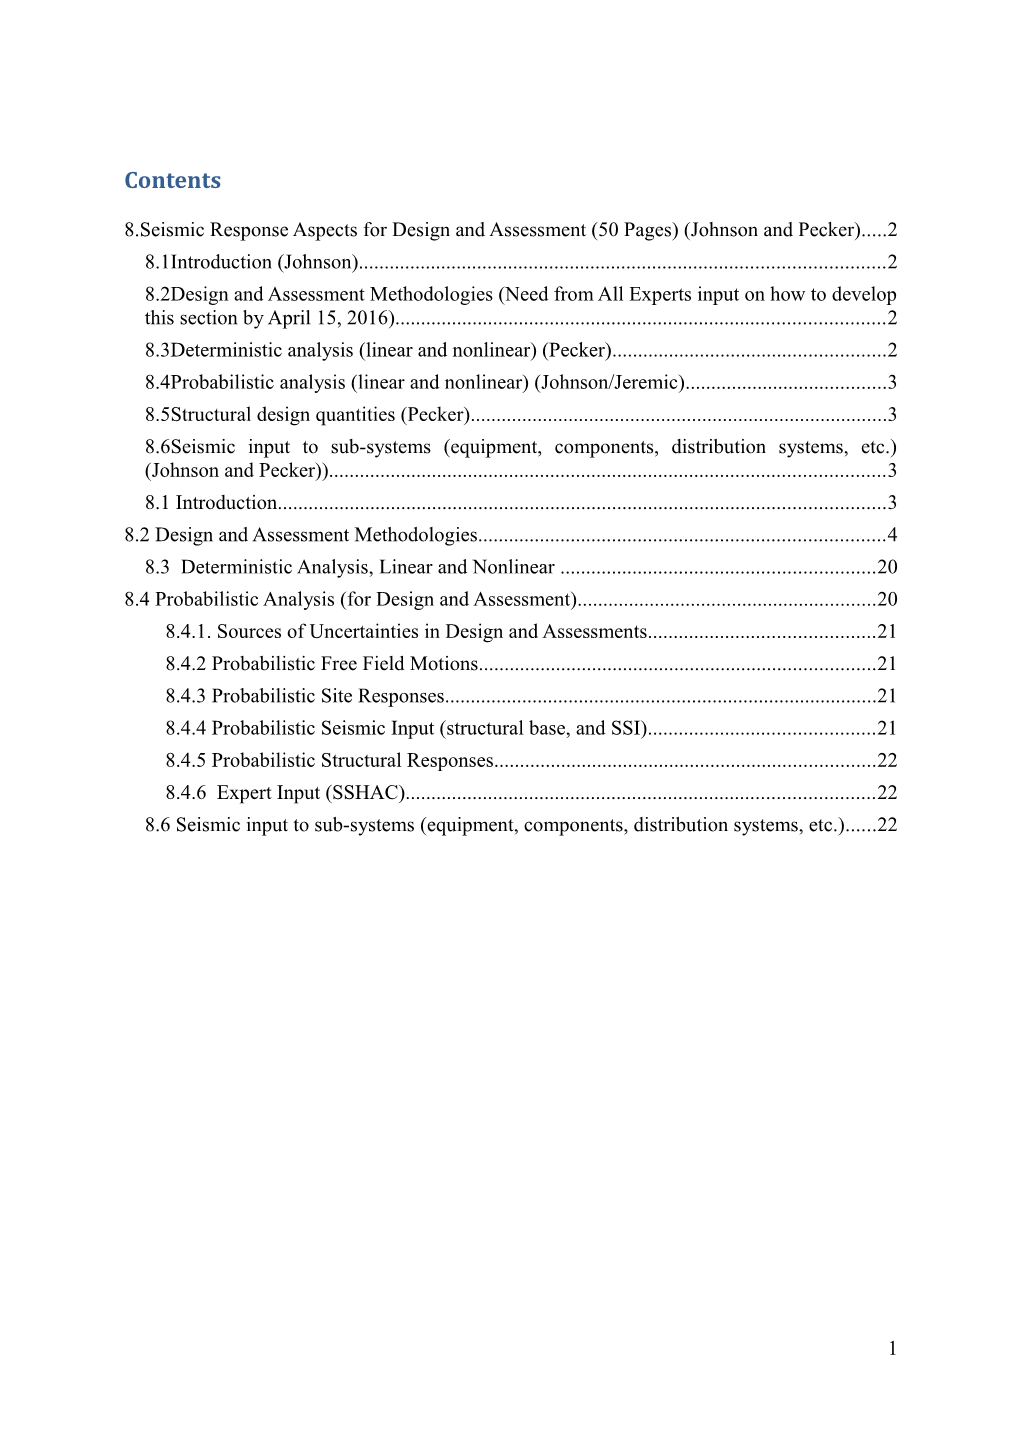 8.Seismic Response Aspects for Design and Assessment (50 Pages) (Johnson and Pecker) 2